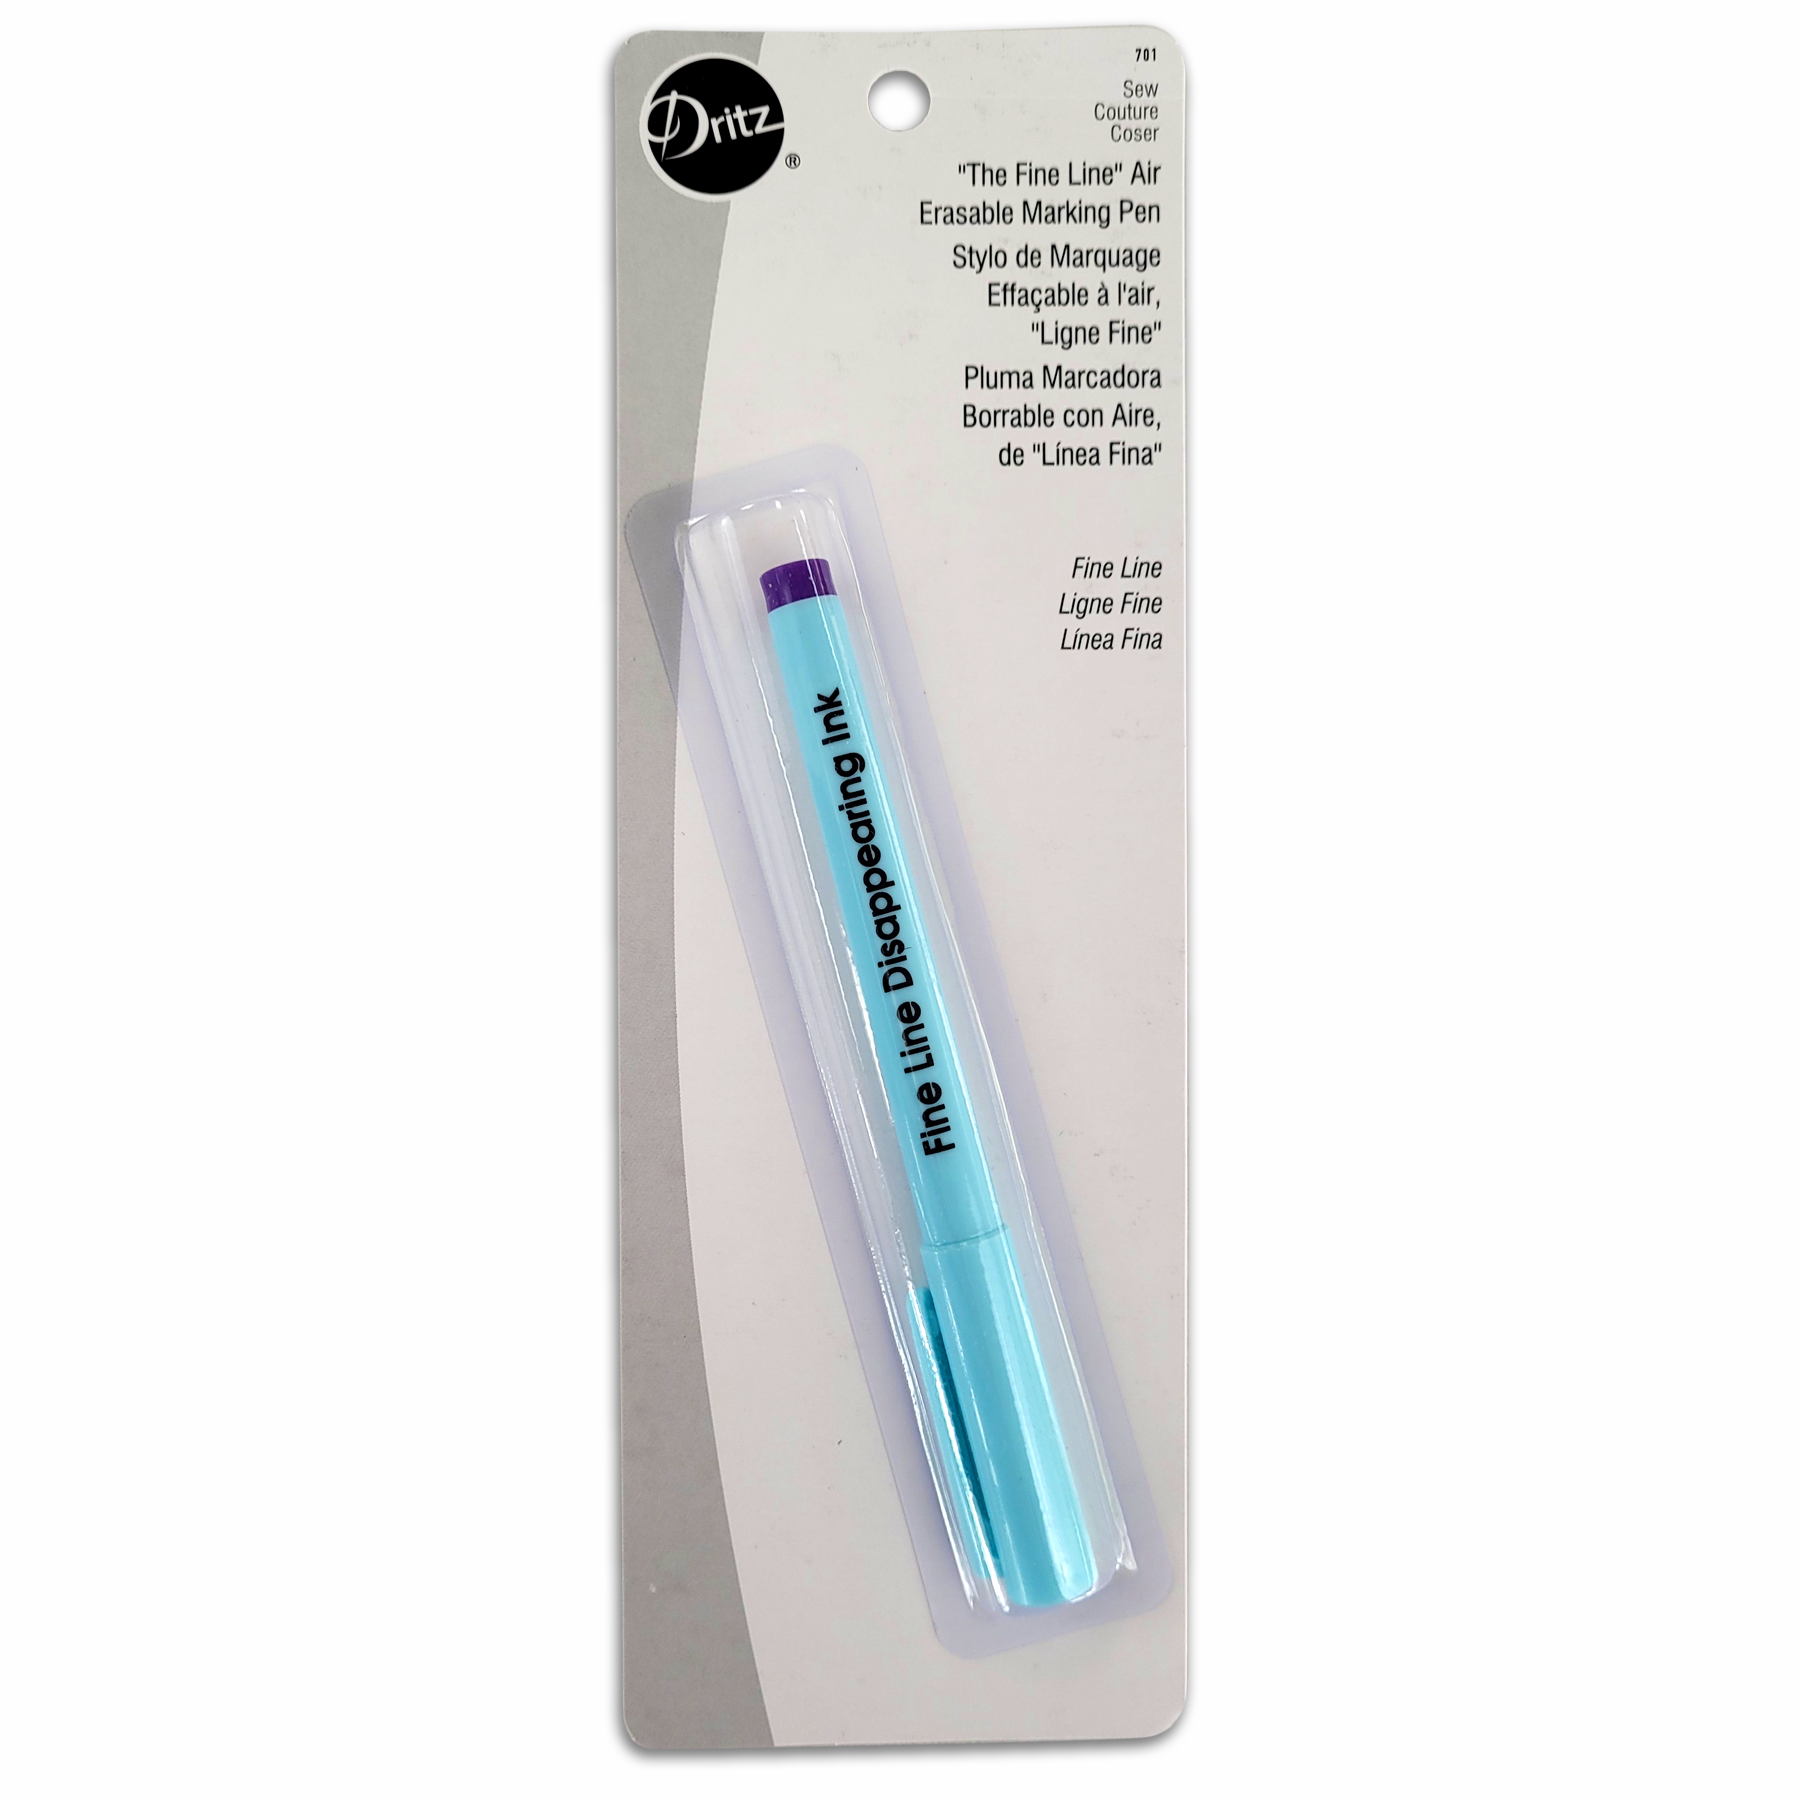  Air Erasable Fabric Marking Pen Disappearing Ink Makring Pen  Fabric Marker Water Soluble Ink for Embroidery Cross Stitch Handicarft  Needlework Quilting Tracing and Stitching, White Ink, Pack of 12